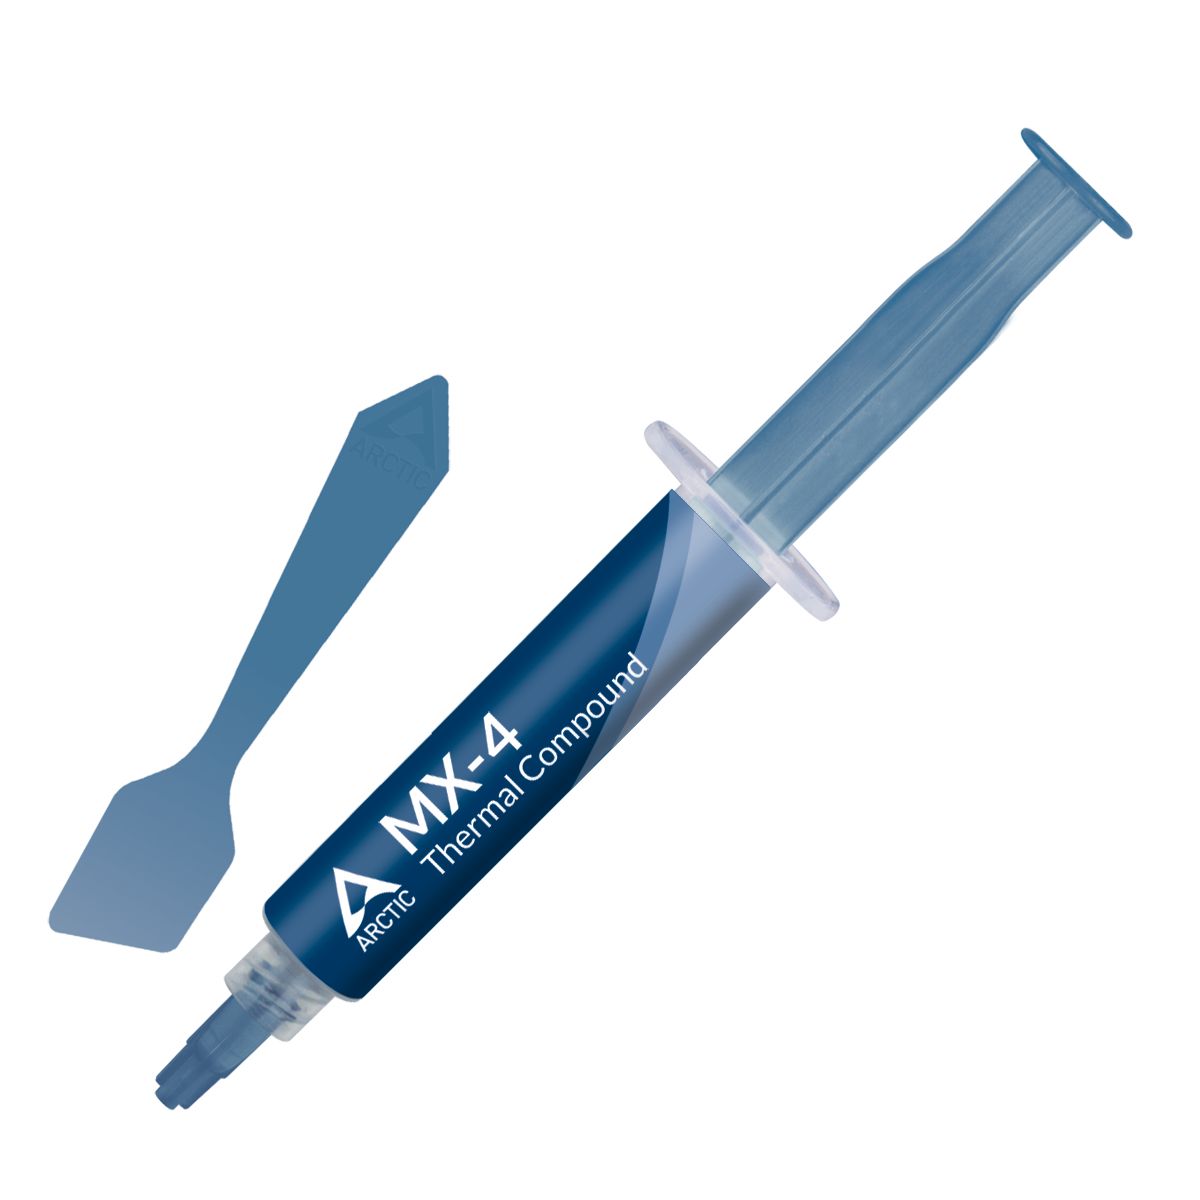 ARCTIC MX-4 Highest Performance Thermal Compound_1